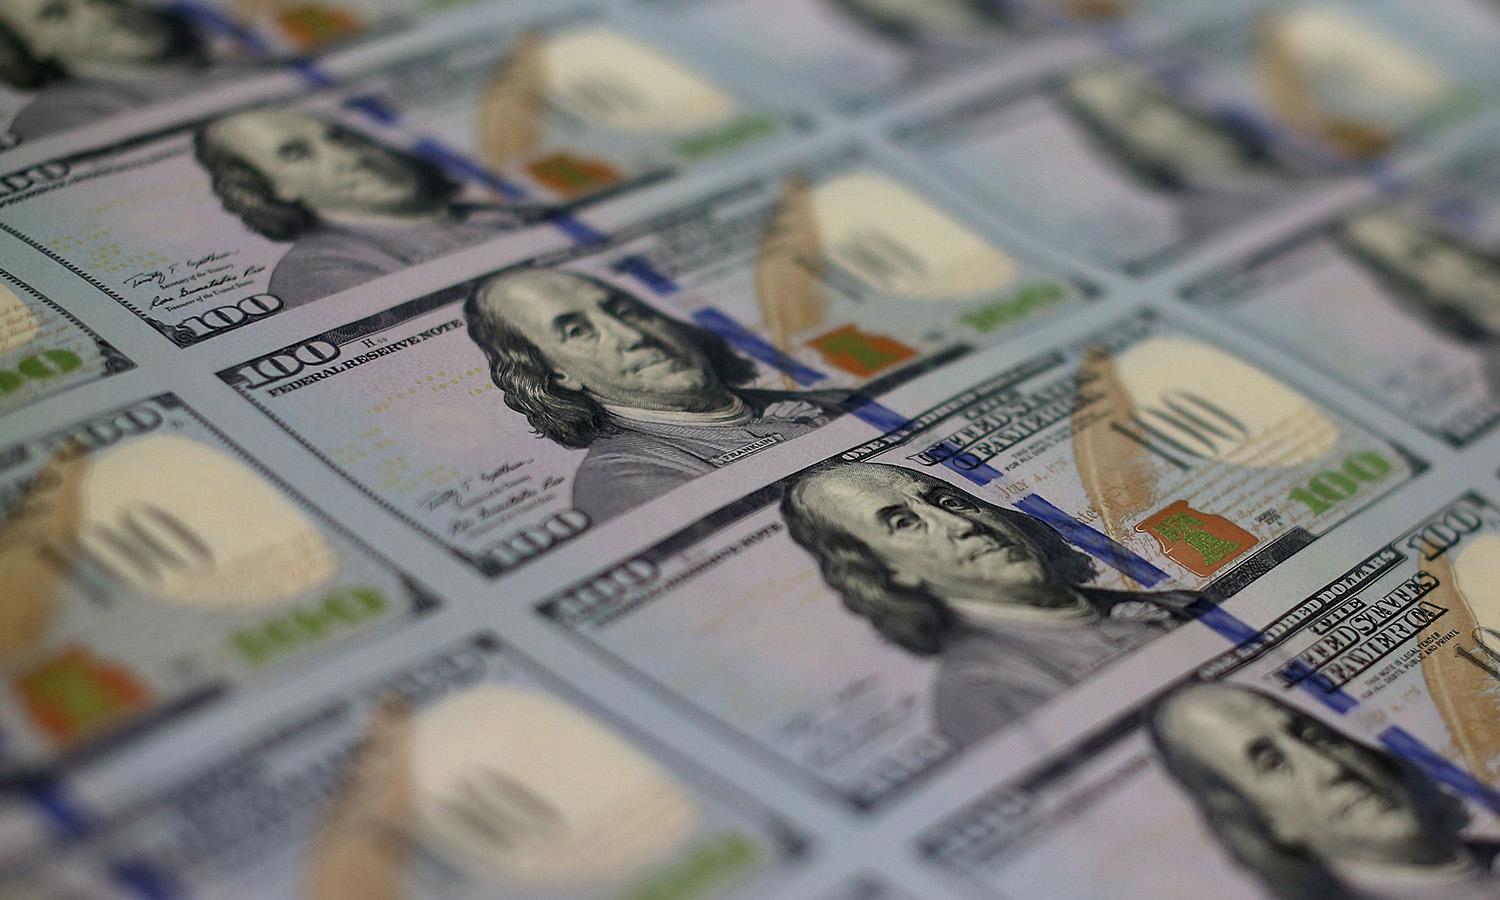 Newly redesigned $100 notes lay in stacks at the Bureau of Engraving and Printing on May 20, 2013, in Washington. (Photo by Mark Wilson/Getty Images)